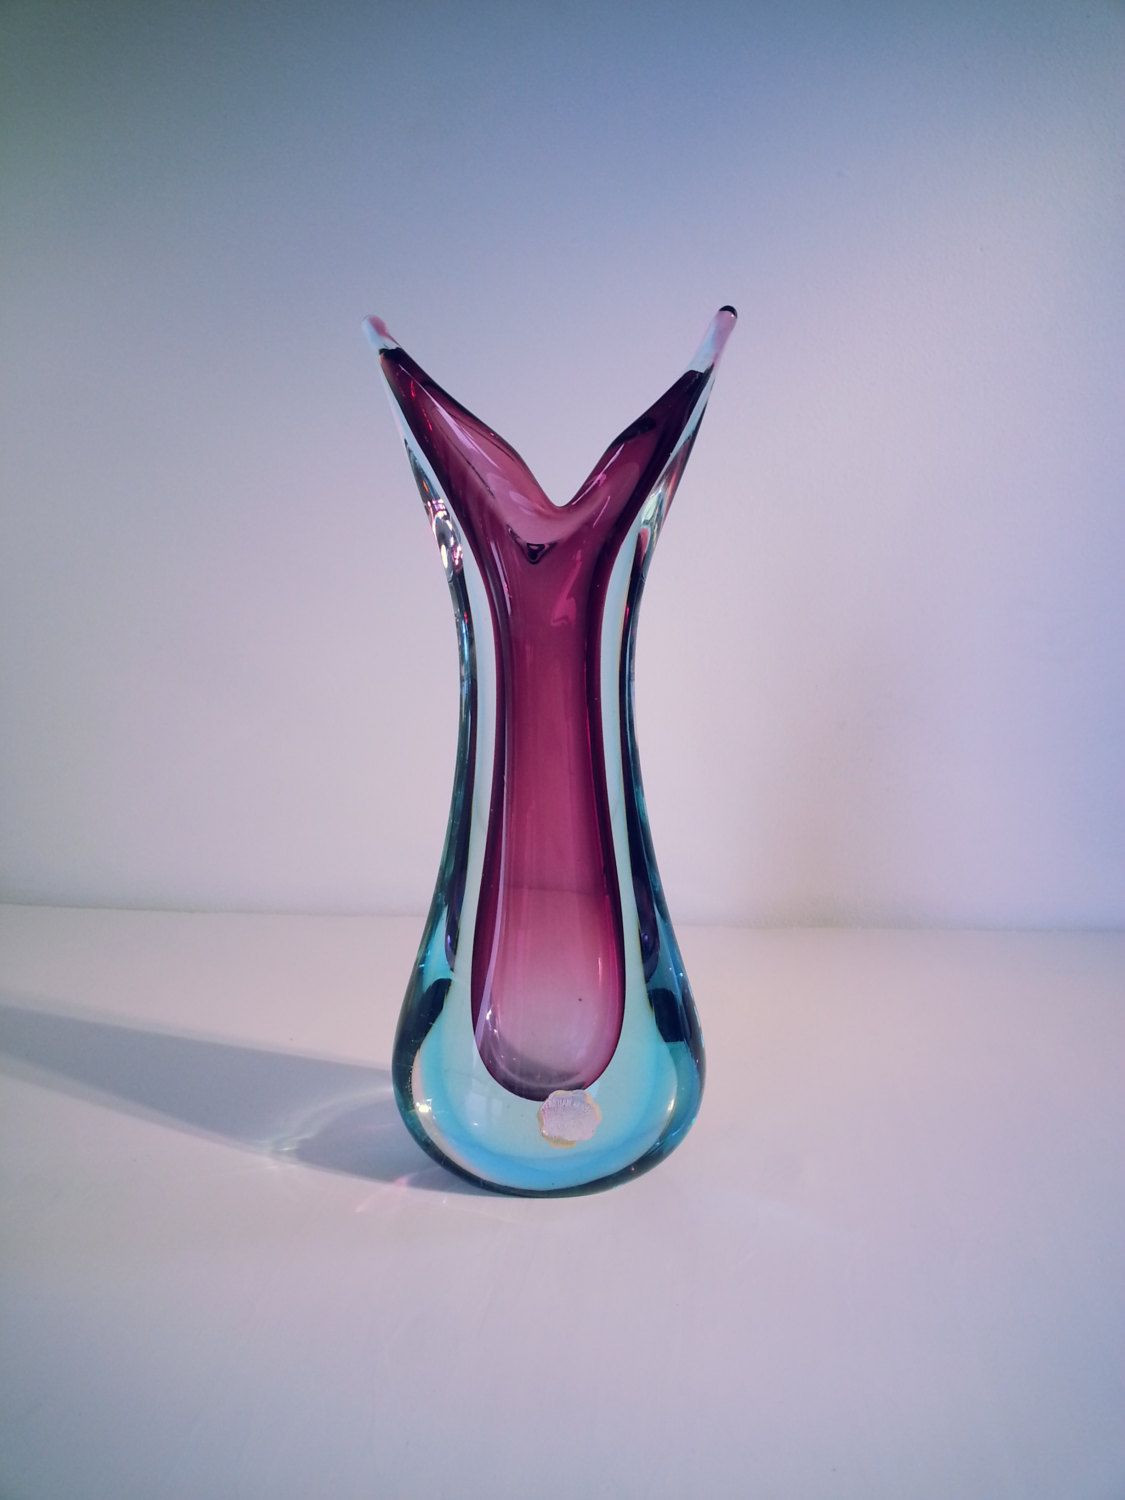 11 Perfect Rose Gold Glass Vase 2024 free download rose gold glass vase of murano sommerso genuine venetian glass 1950s 1960s purple blue throughout murano sommerso genuine venetian glass 1950s 1960s purple blue glass vase pulled design vase